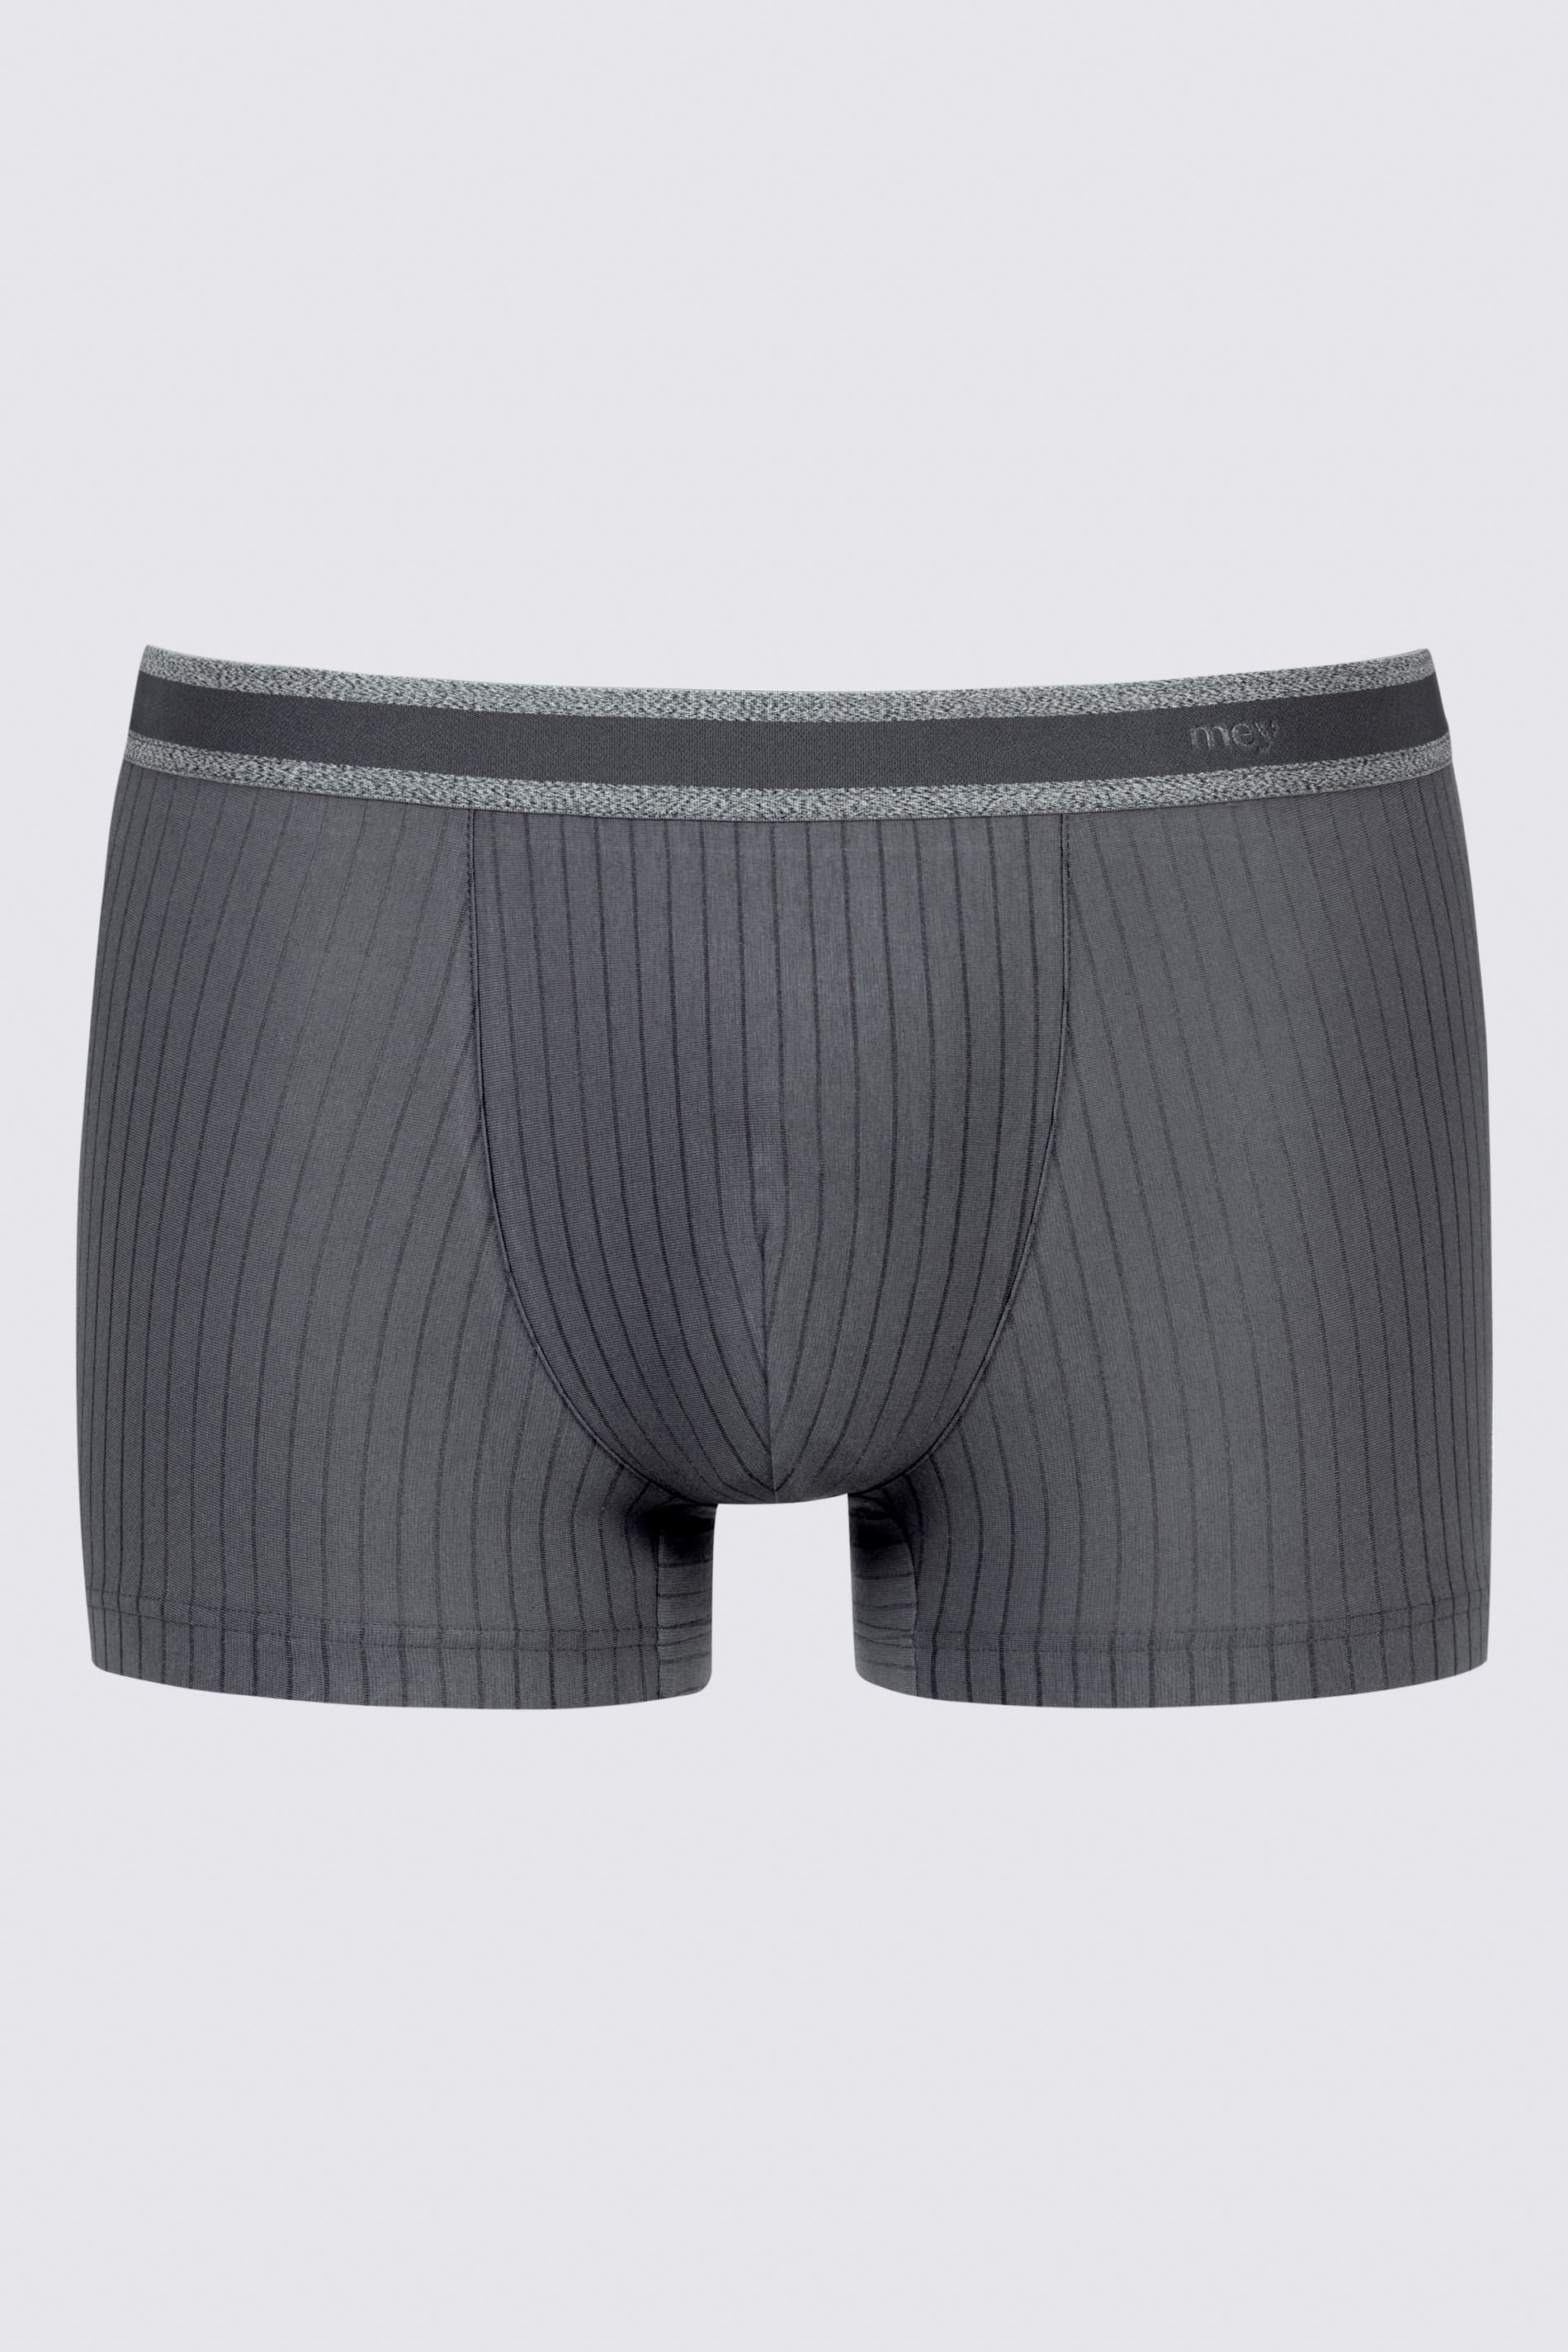 Shorty Soft Grey Unlimited Uitknippen | mey®